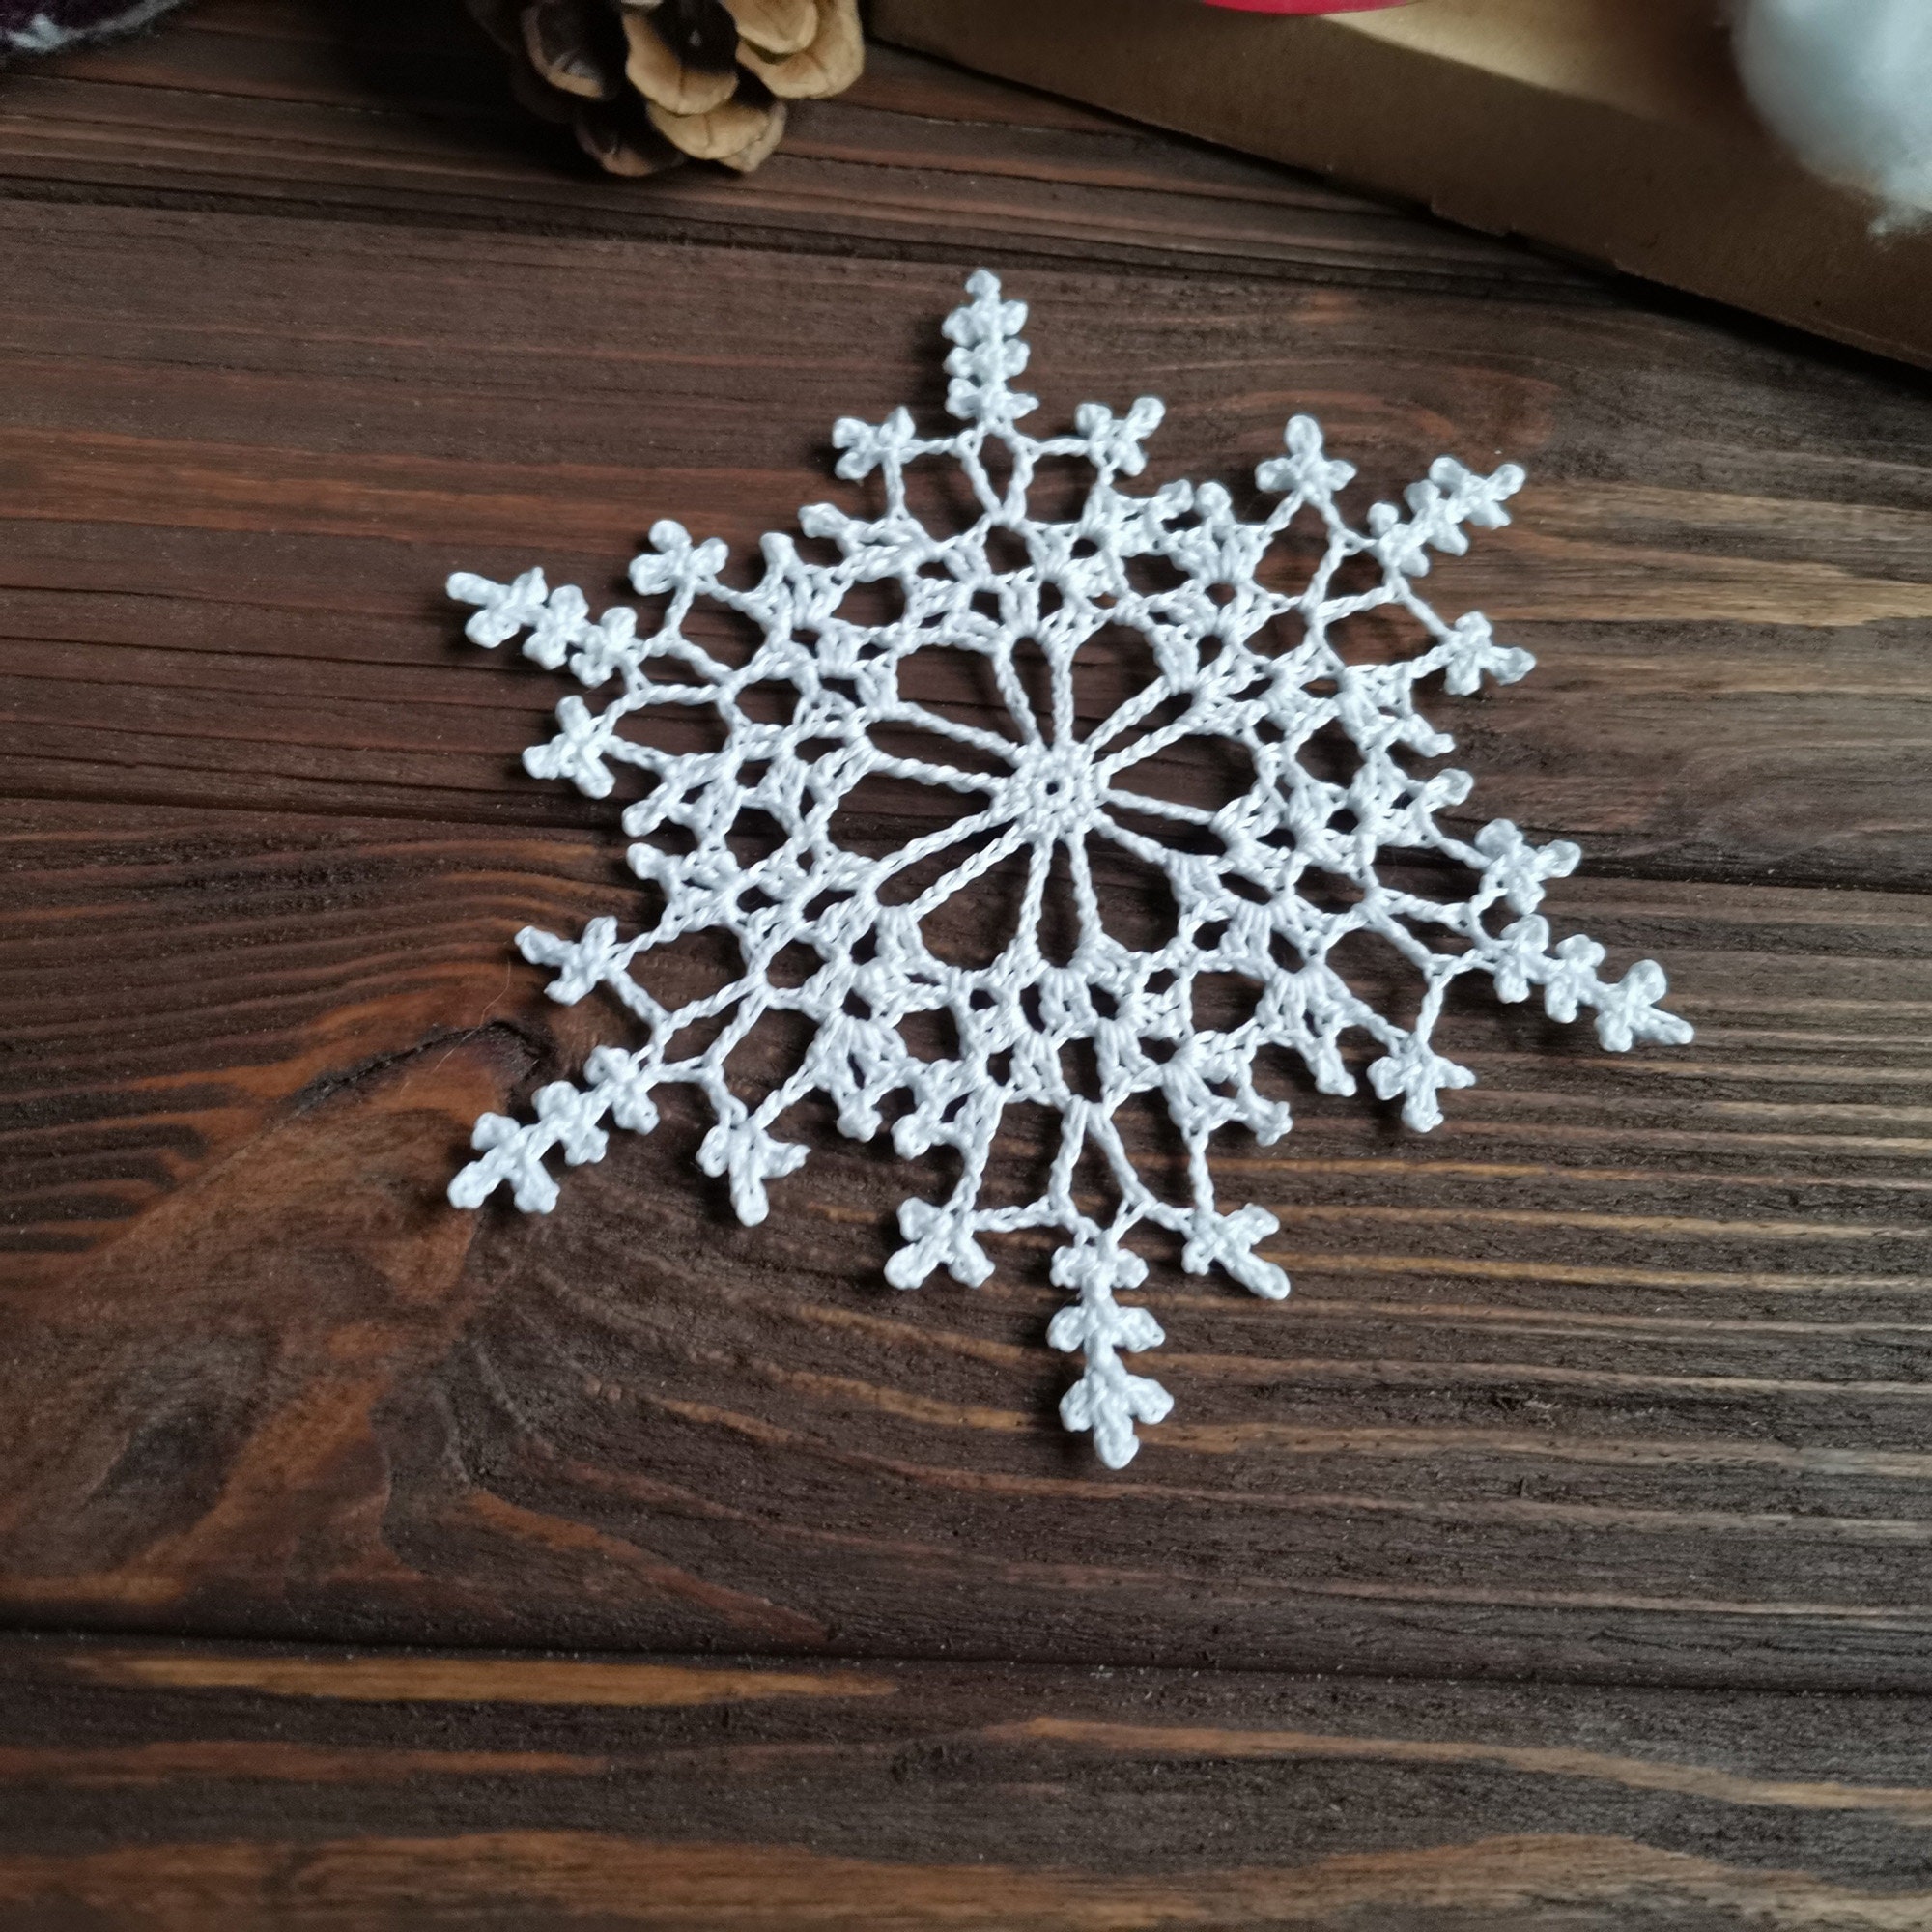 Snowflake Ornaments - One Dozen Large (HLKSFDSWH) by mathgrrl